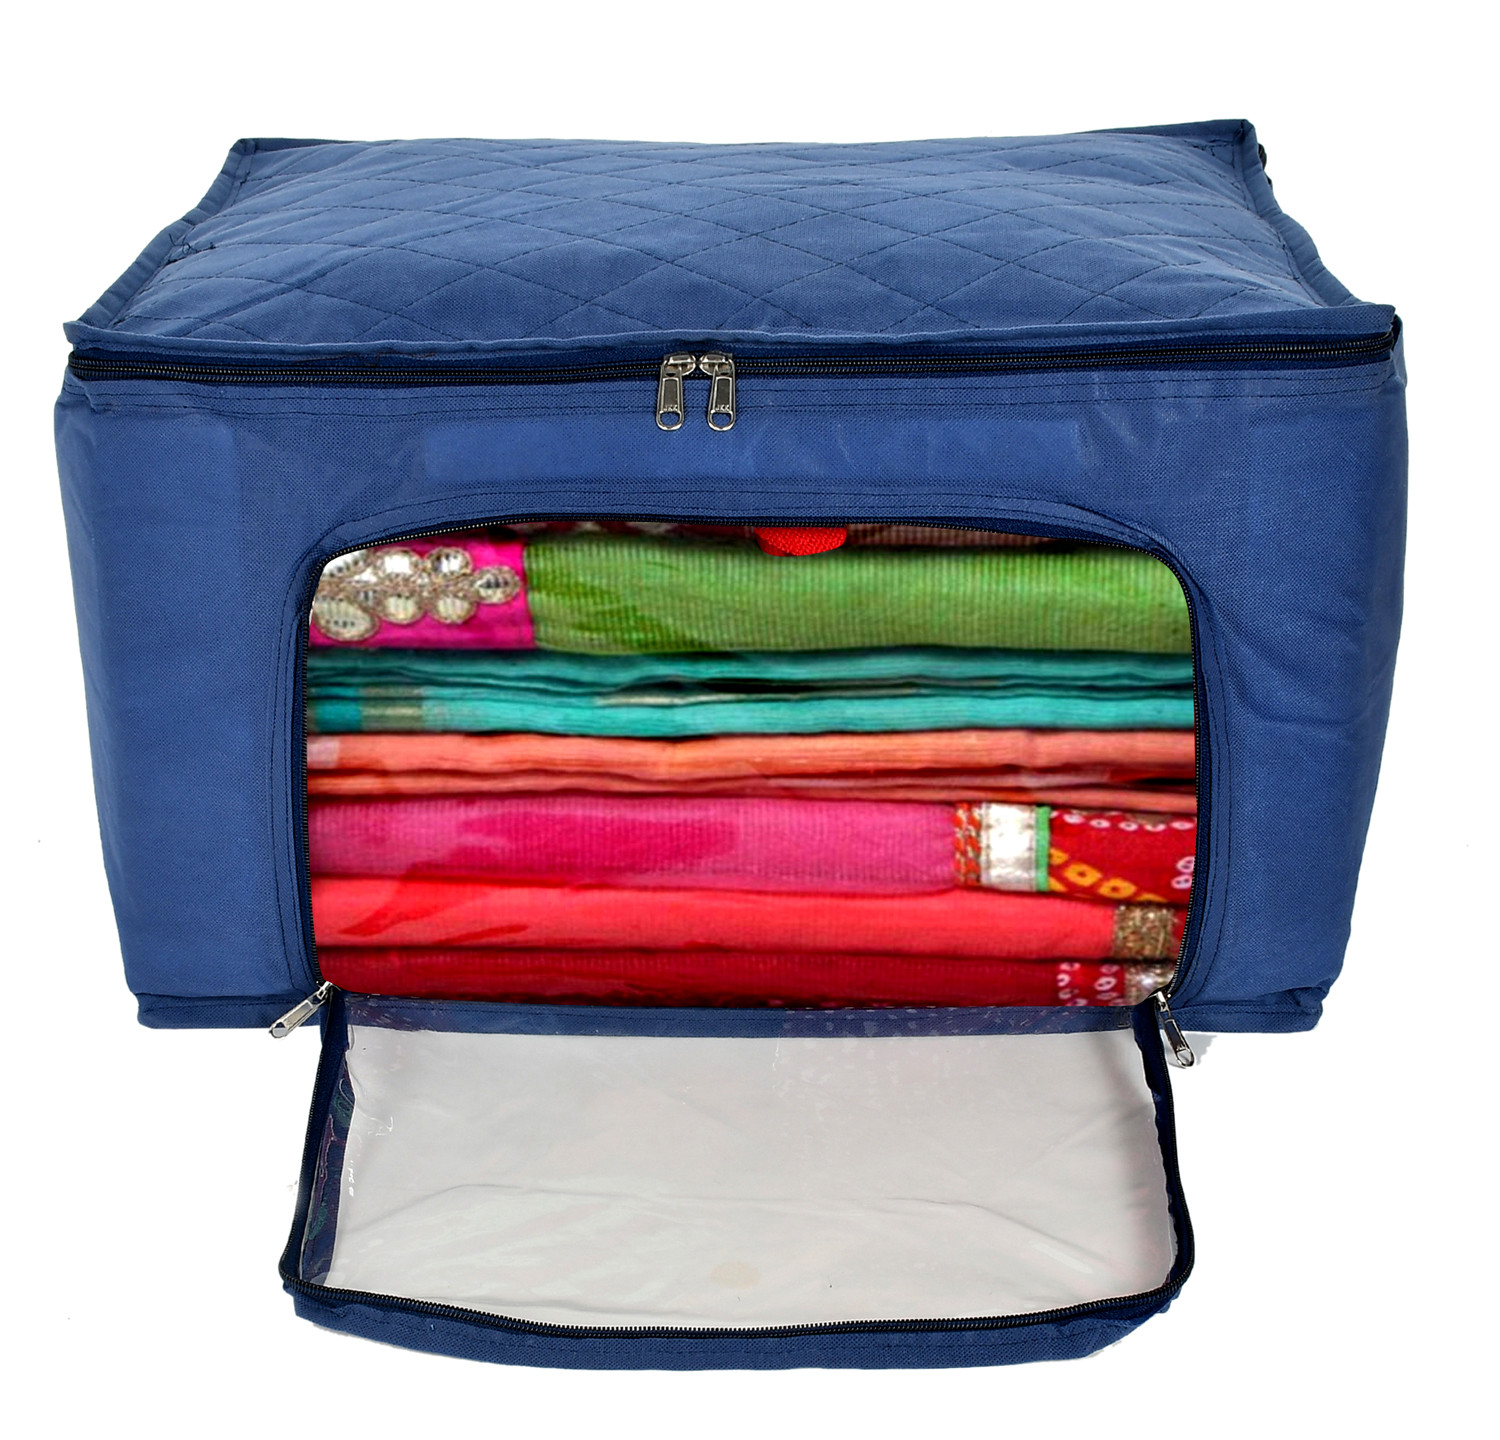 Kuber Industries Non-Woven Living Box, Underbed Storage, Cloth Storage Boxes for Wardrobe With Window (Blue) 54KM4093